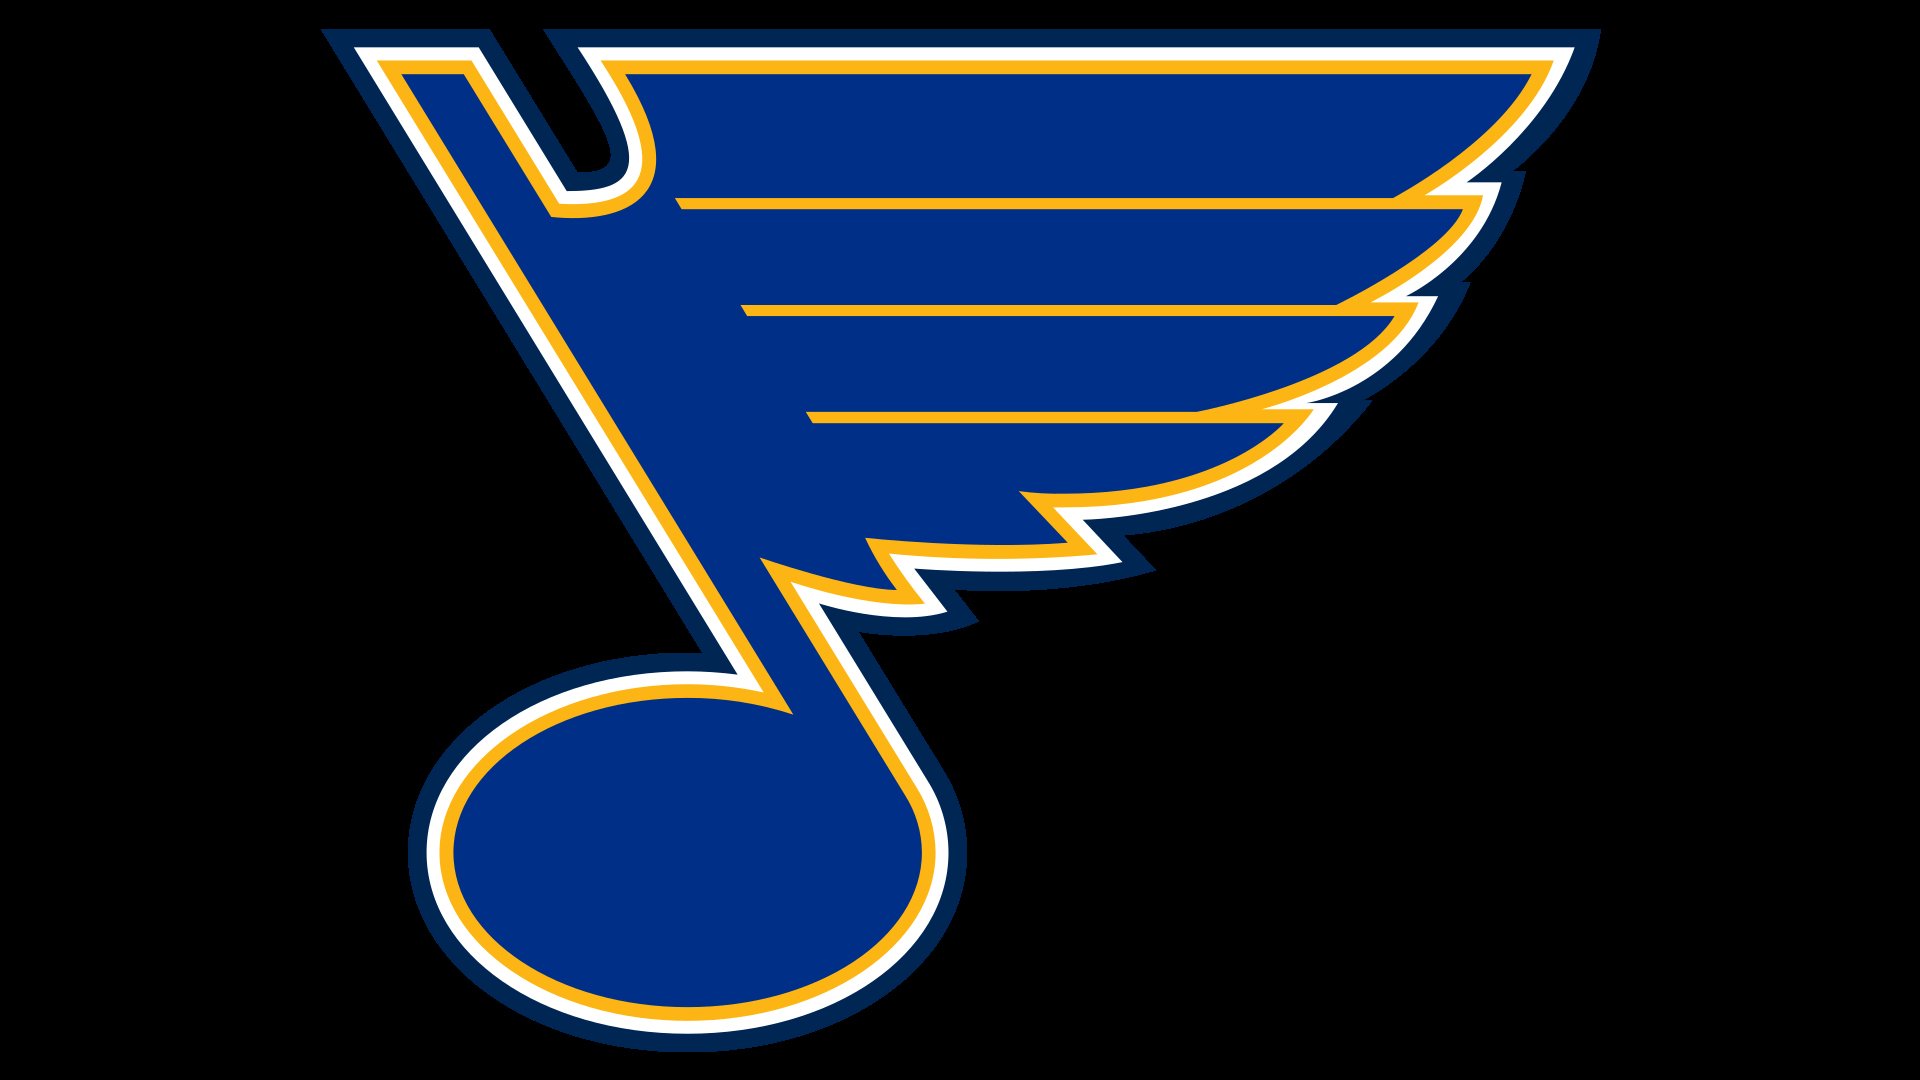 St. Louis Blues Logo, St. Louis Blues Symbol, Meaning, History and Evolution